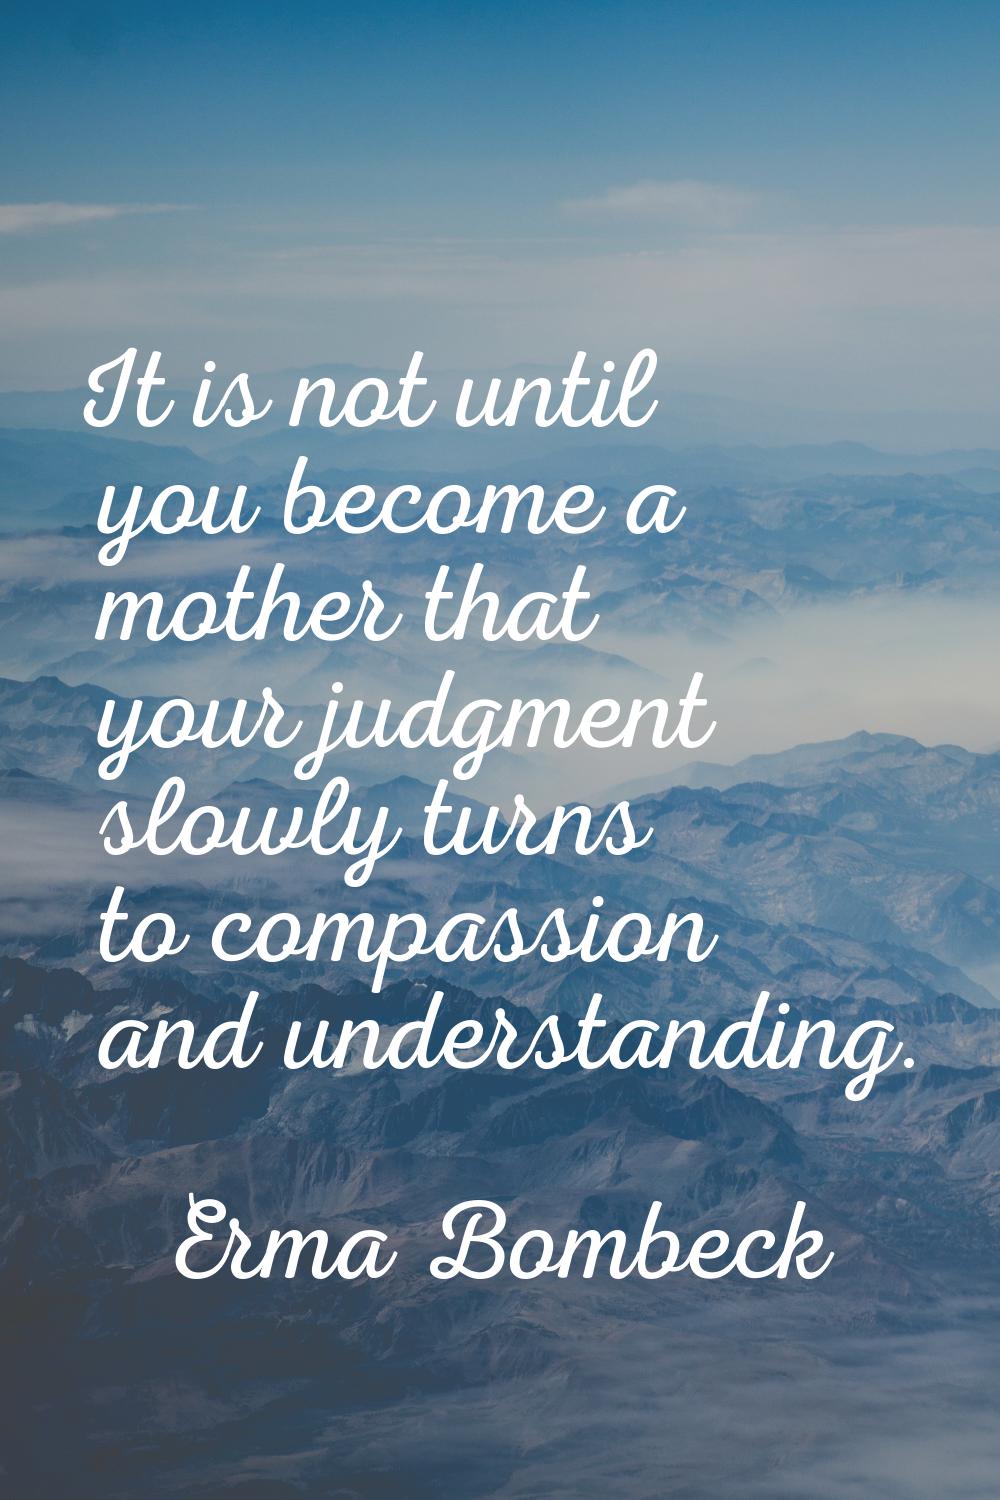 It is not until you become a mother that your judgment slowly turns to compassion and understanding